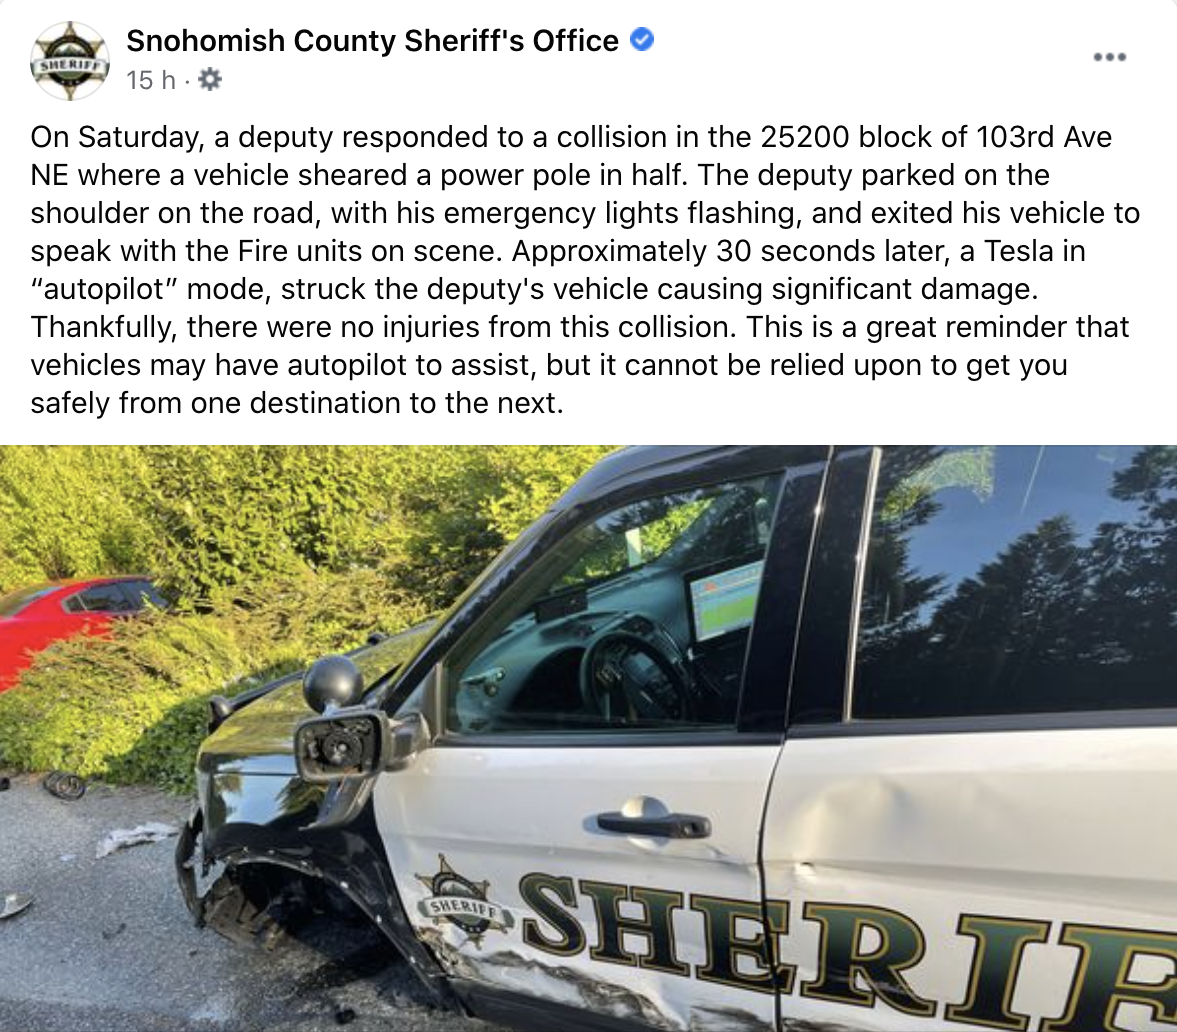 Screenshot of Snohomish County Sheriff's Office statement about the vehicle that was smashed into by the Tesla on Autopilot